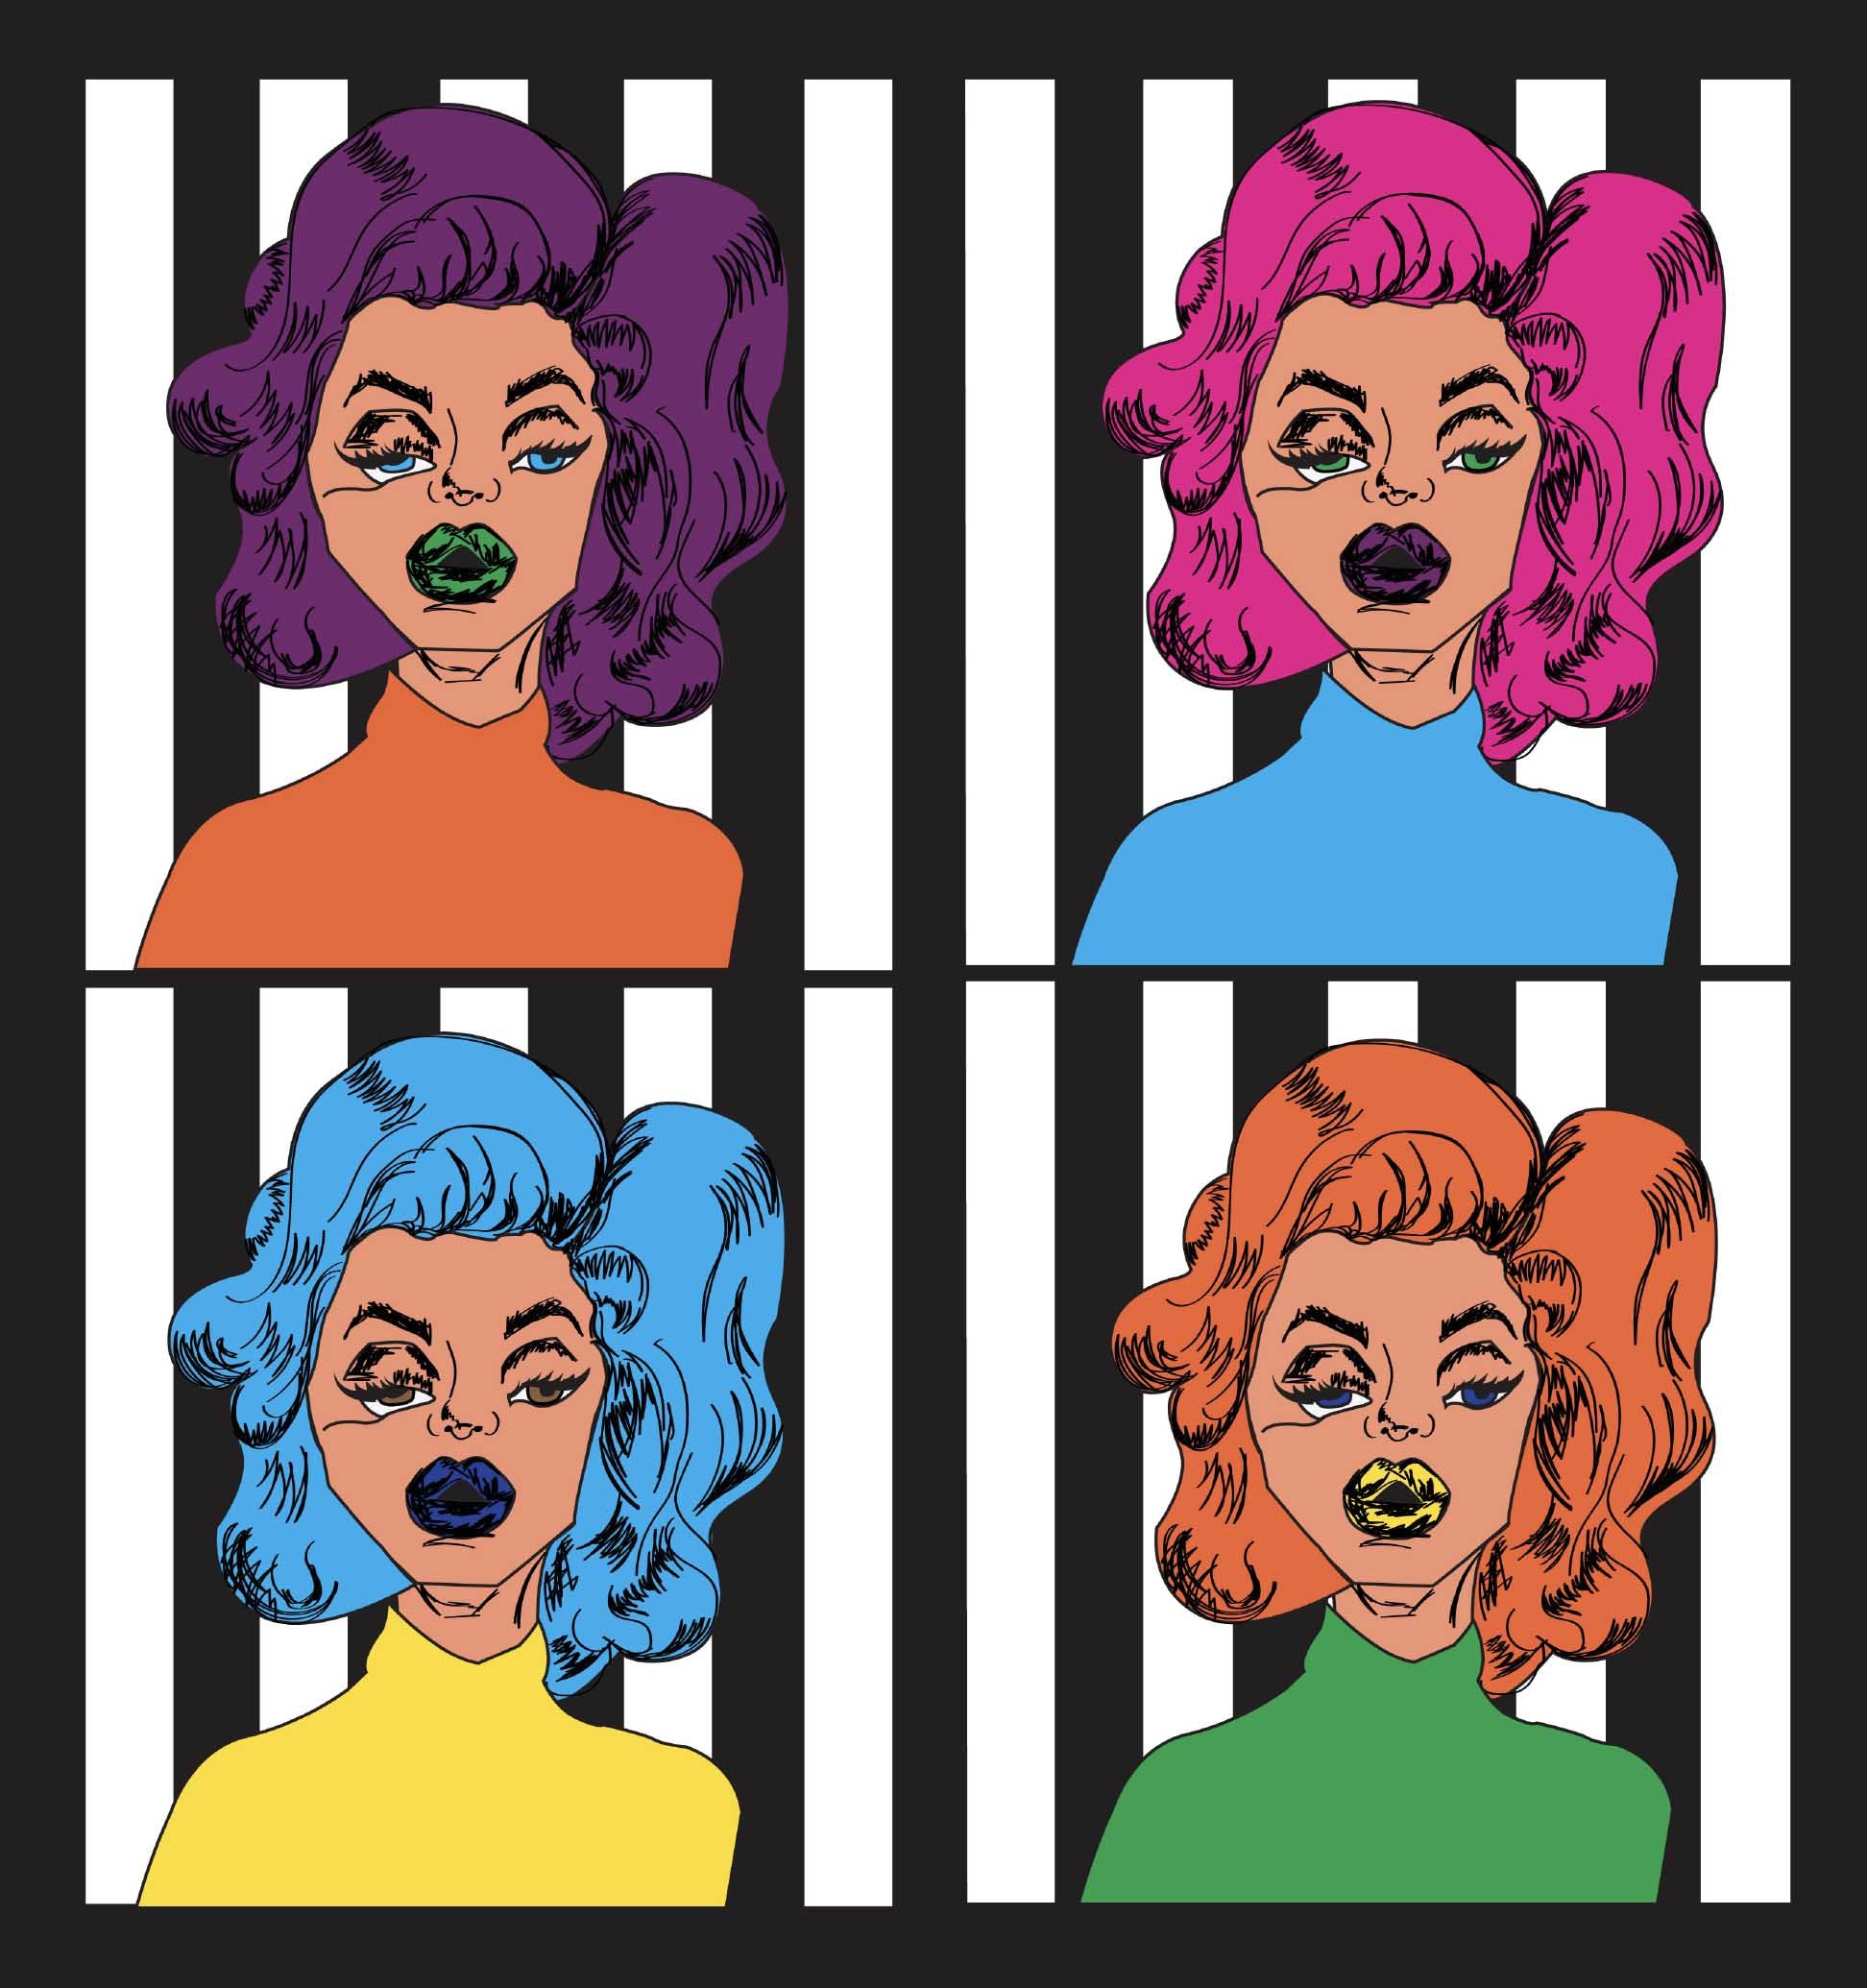 Women with big hair against a striped background. Four variations in different opt-art colors